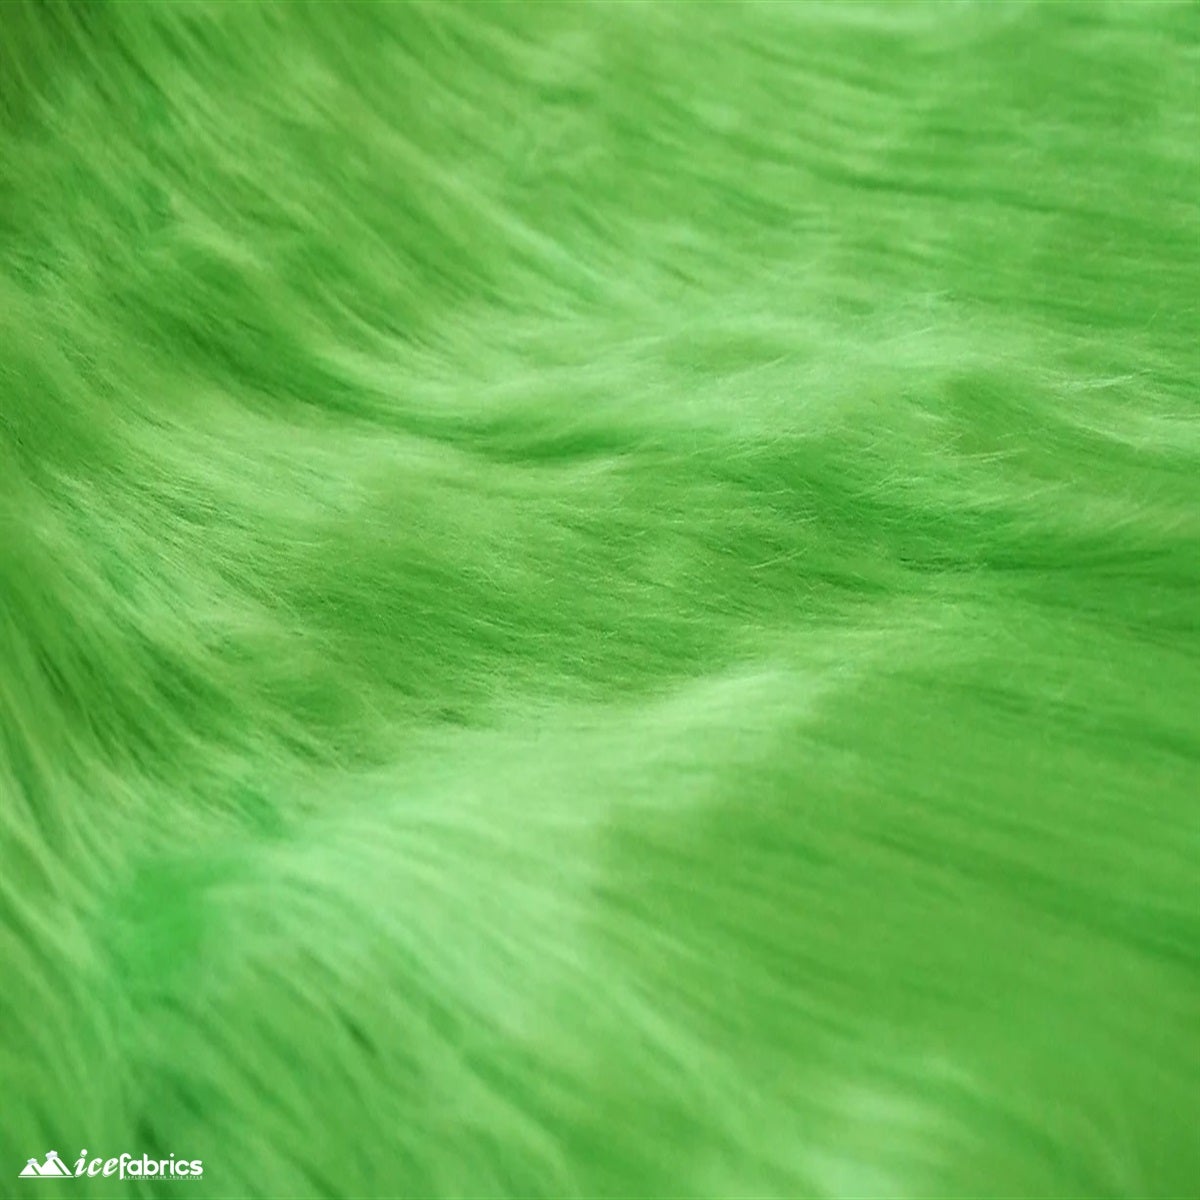 Mohair Faux Fur Fabric By The Roll (20 Yards) 4 Inch PileICE FABRICSICE FABRICSGreenBy The Roll (60" Wide)Mohair Faux Fur Fabric By The Roll (20 Yards) 4 Inch Pile ICE FABRICS